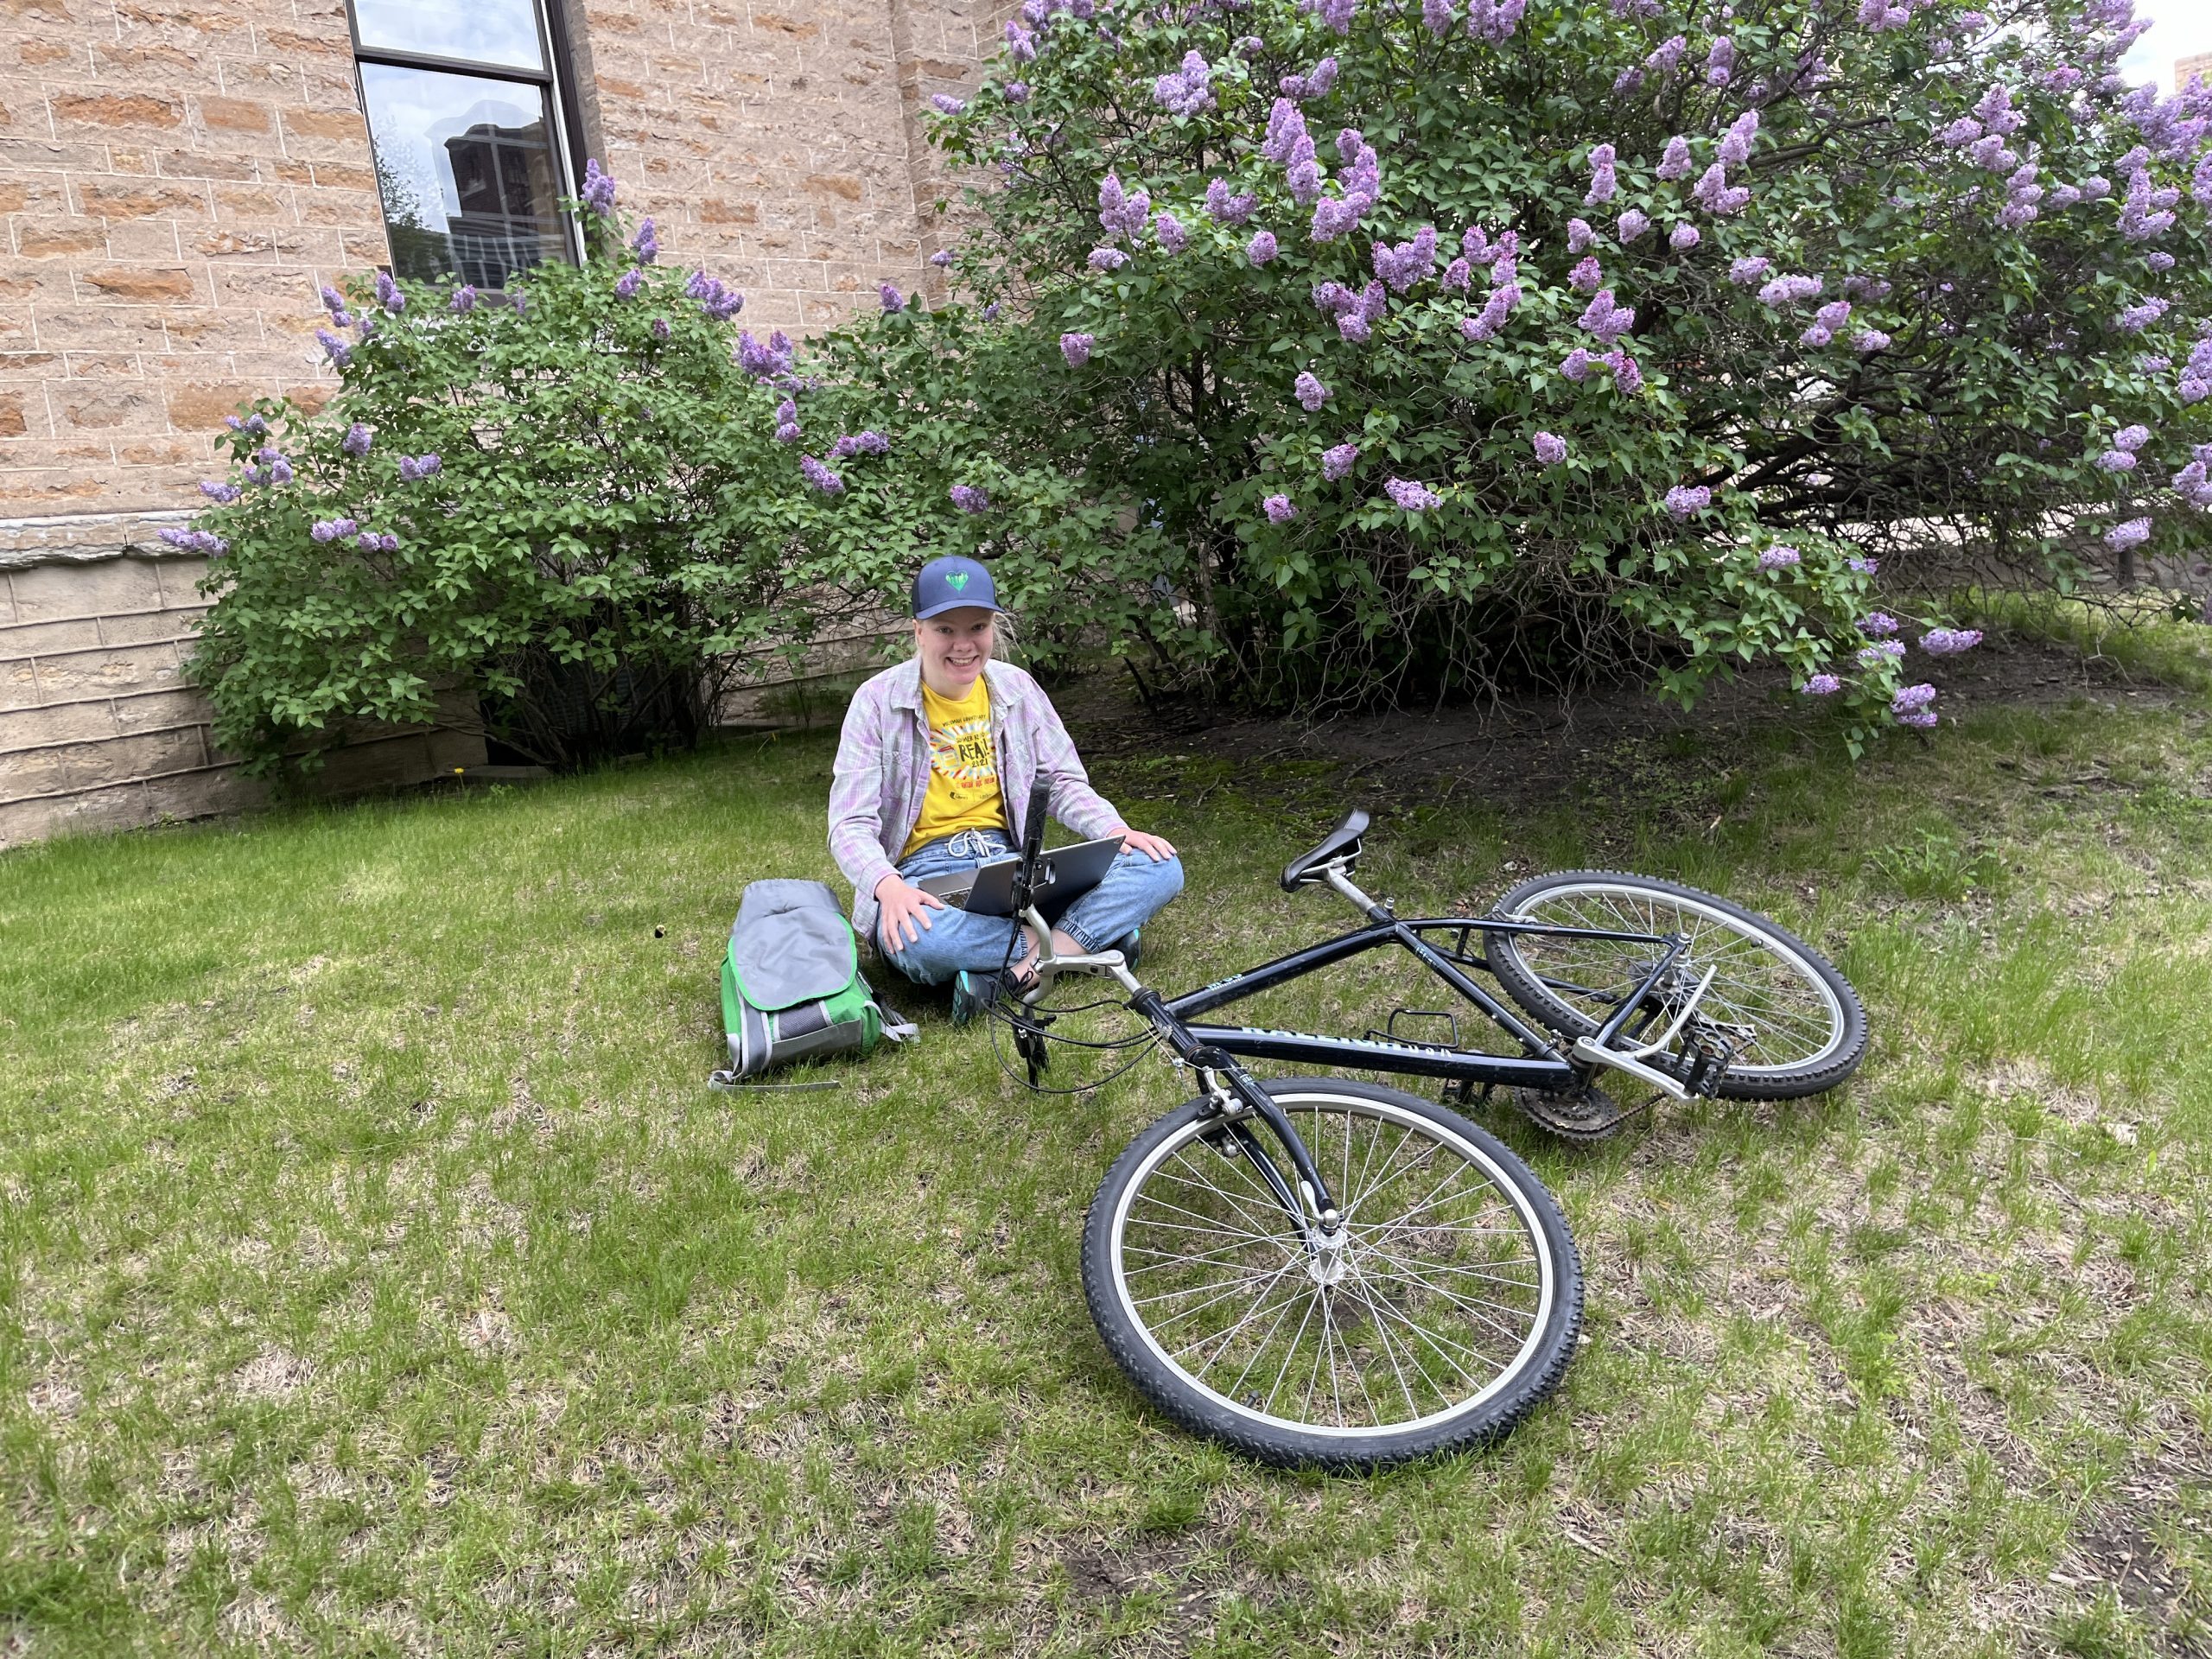 Klara sits on a grassy hill with her laptop and bicycle